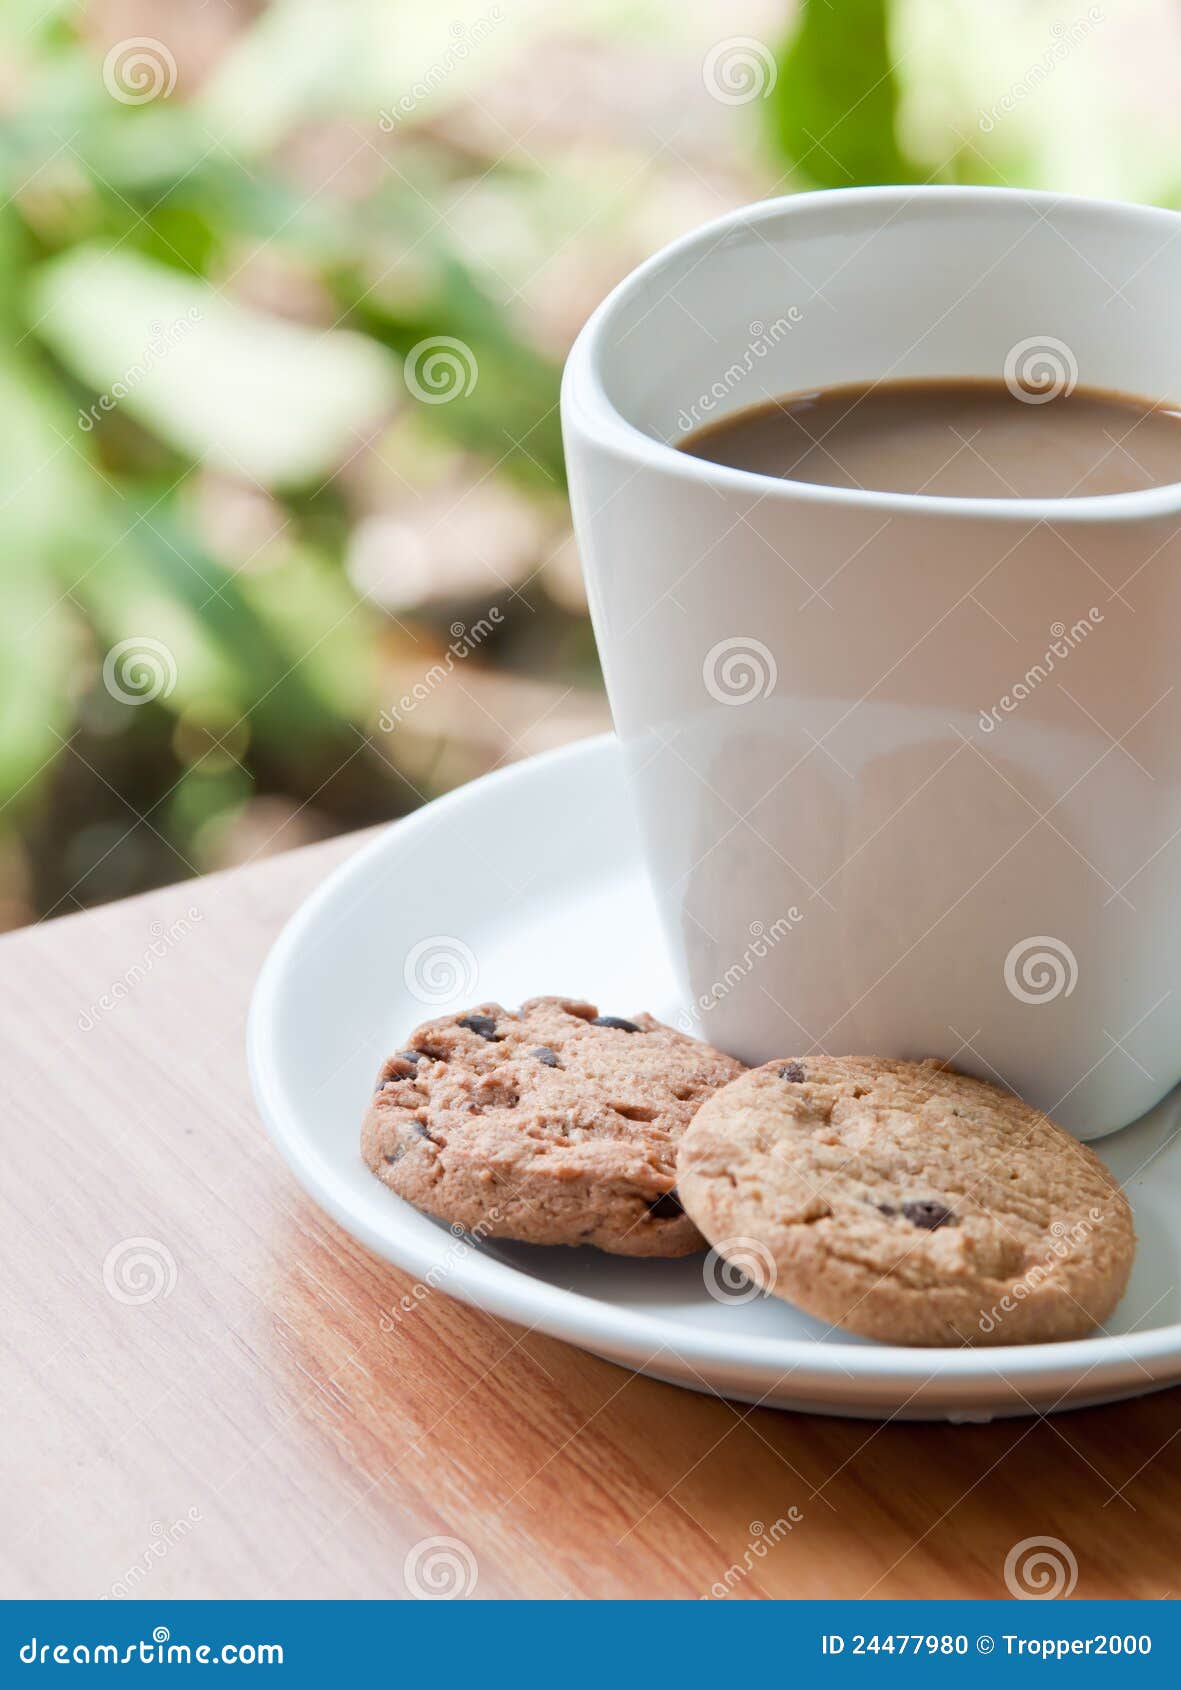 Coffee cup with cookie . stock photo. Image of cafe, break - 24477980